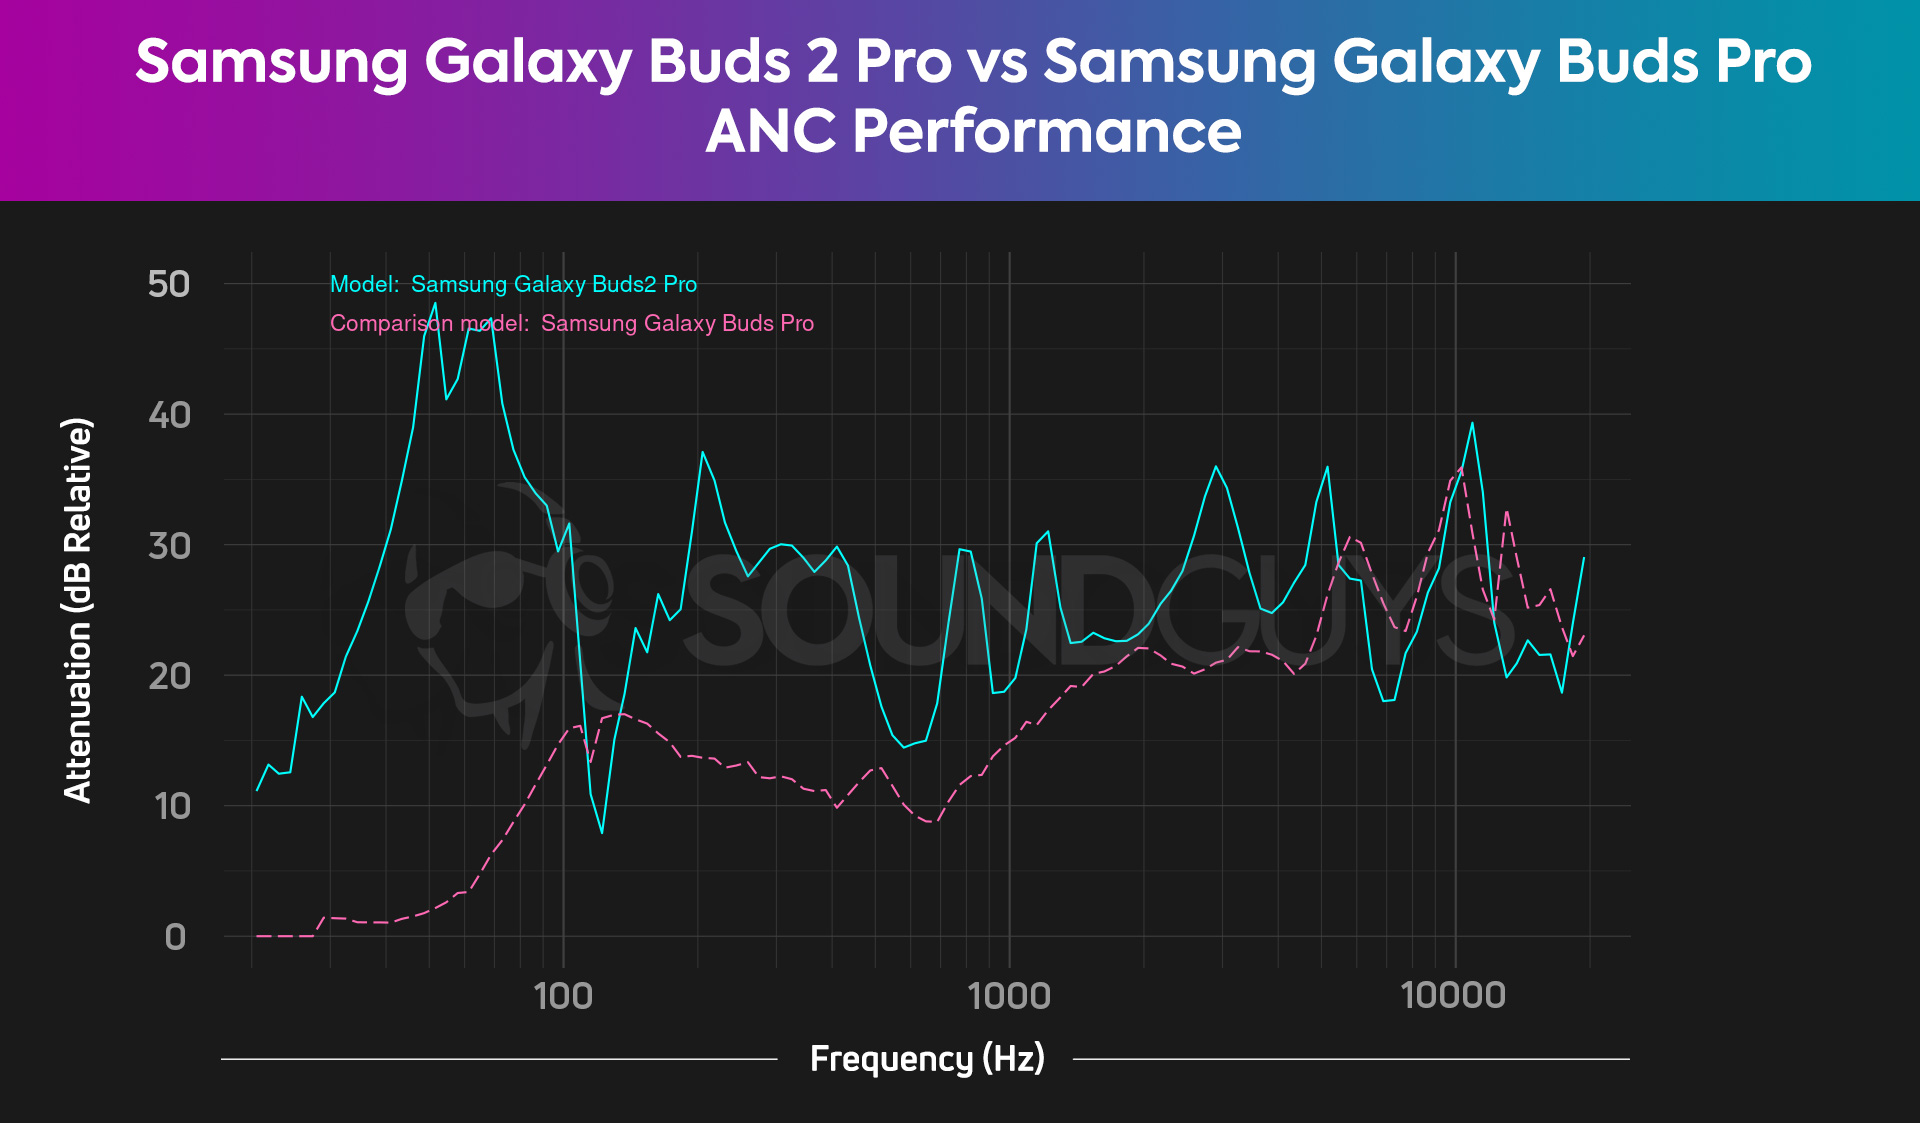 A chart shows the combined ANC and isolation of the Samsung Galaxy Buds Pro compared to the Samsung Galaxy Buds 2 Pro.